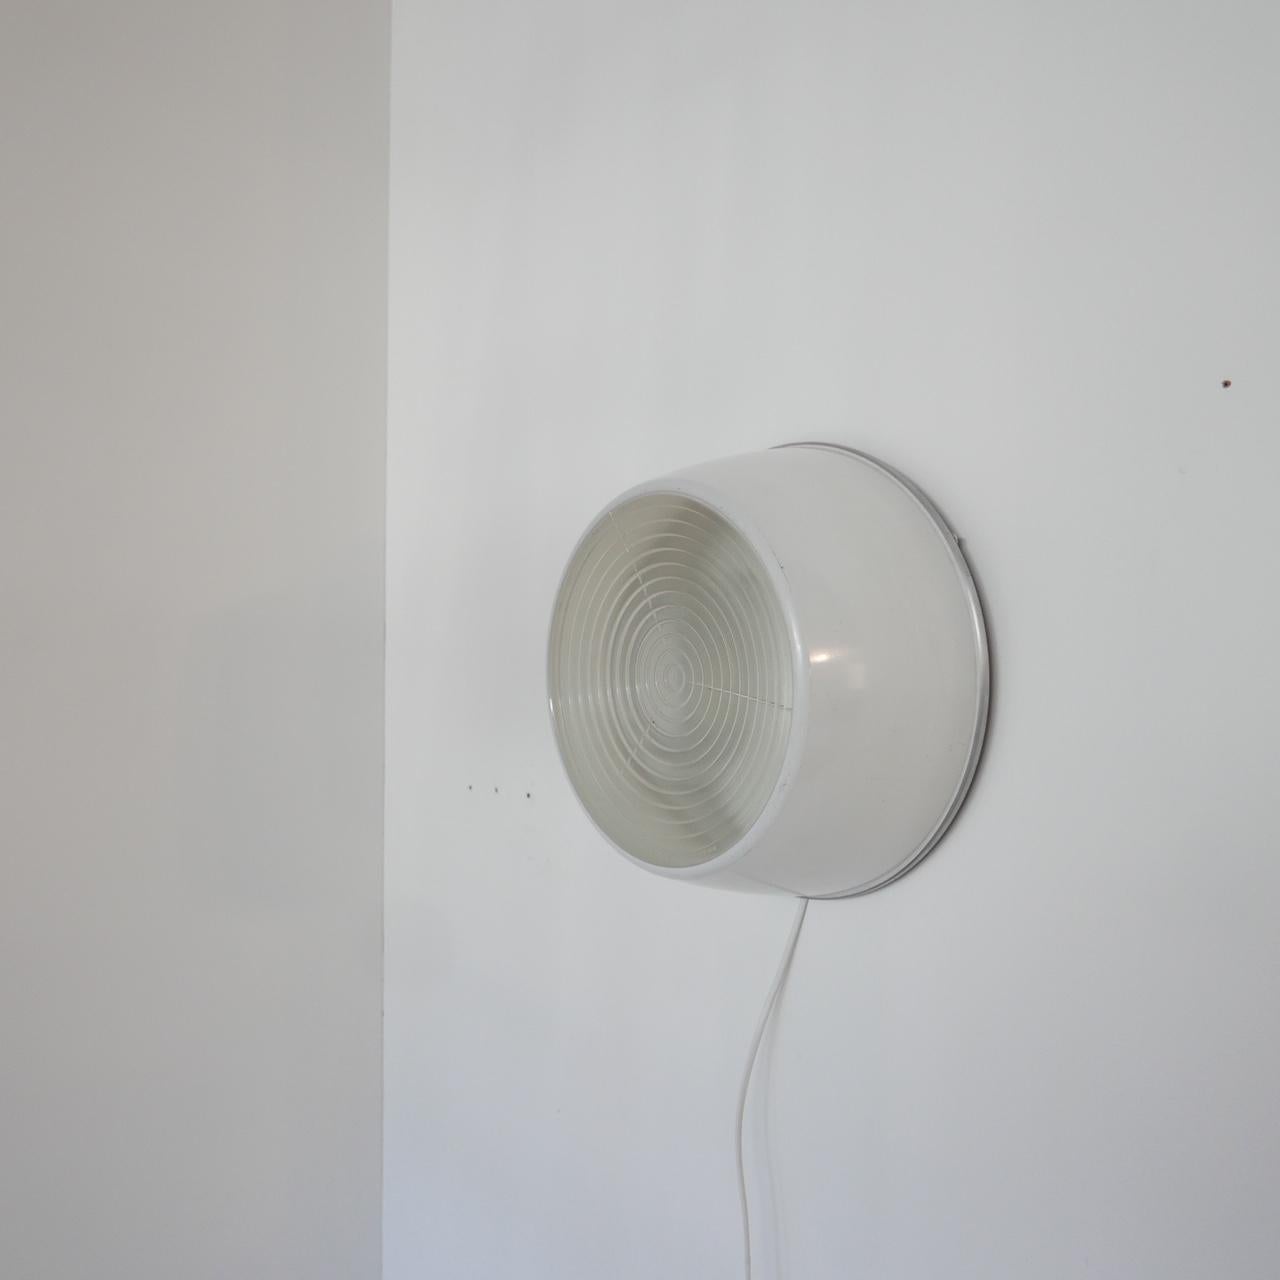 Holophane wall or ceiling lights,

Three available, priced and sold individually.

Two-tone, clear glass with an opaline glass surround.

Re-wired and ready to hang.

Embossed with Holophane and made in France in the glass.

French, circa